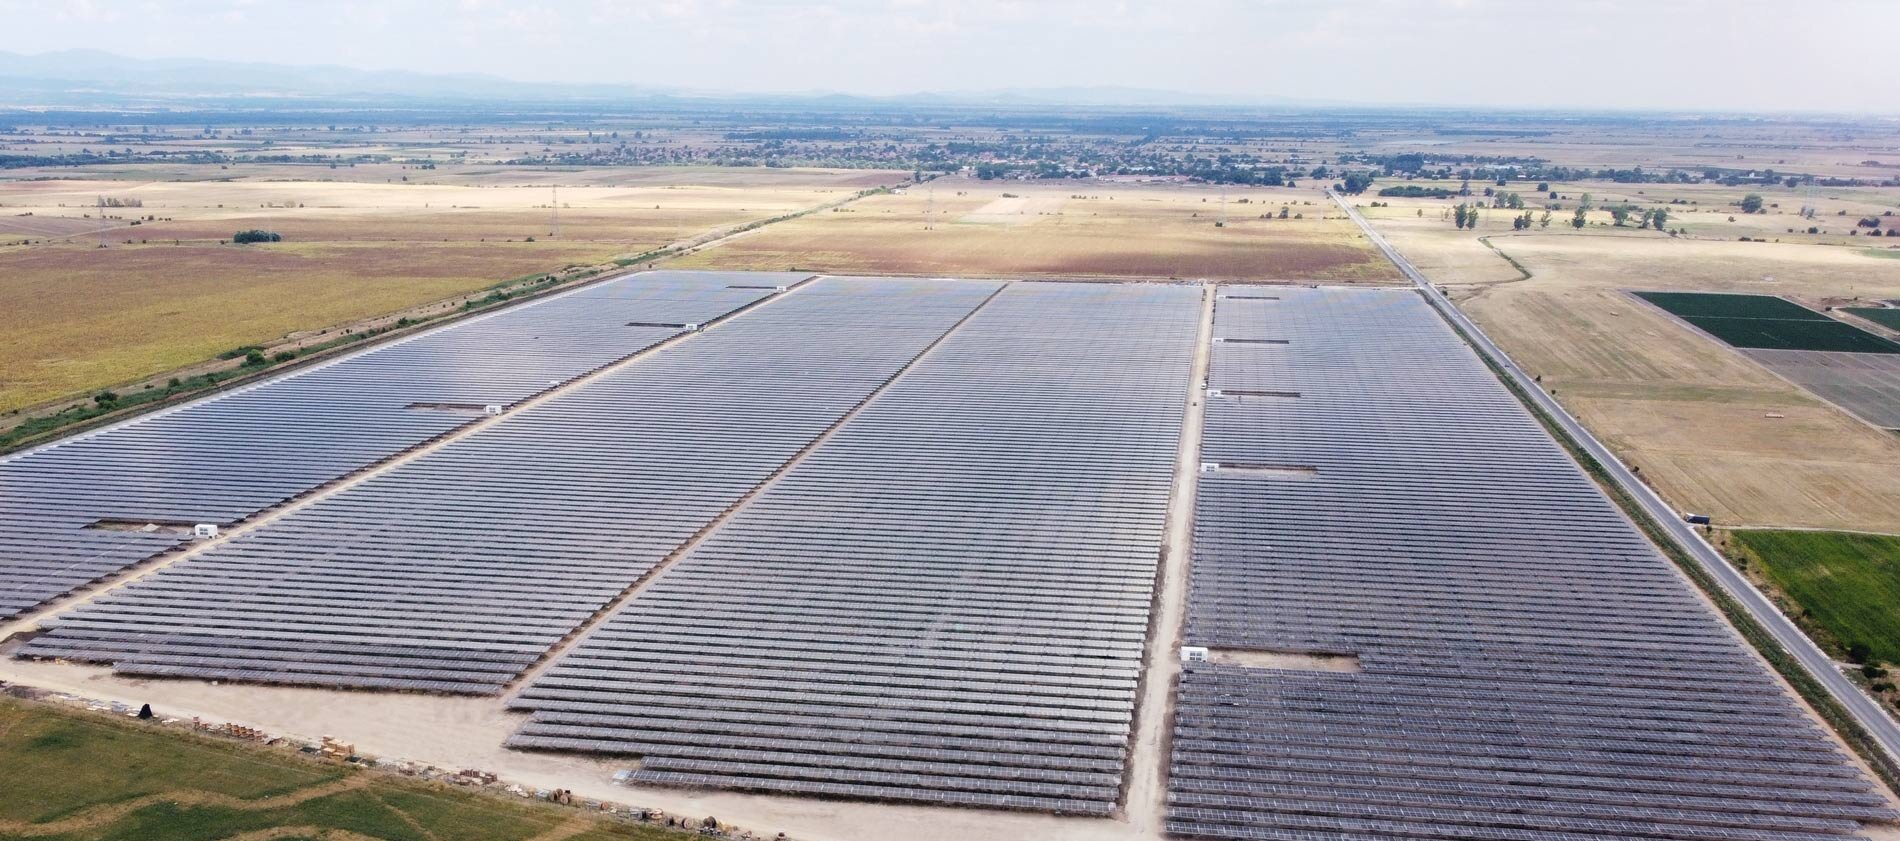 SENS LSG GmbH is supporting Bulgaria in its energy transition with a first 66 MWp solar project